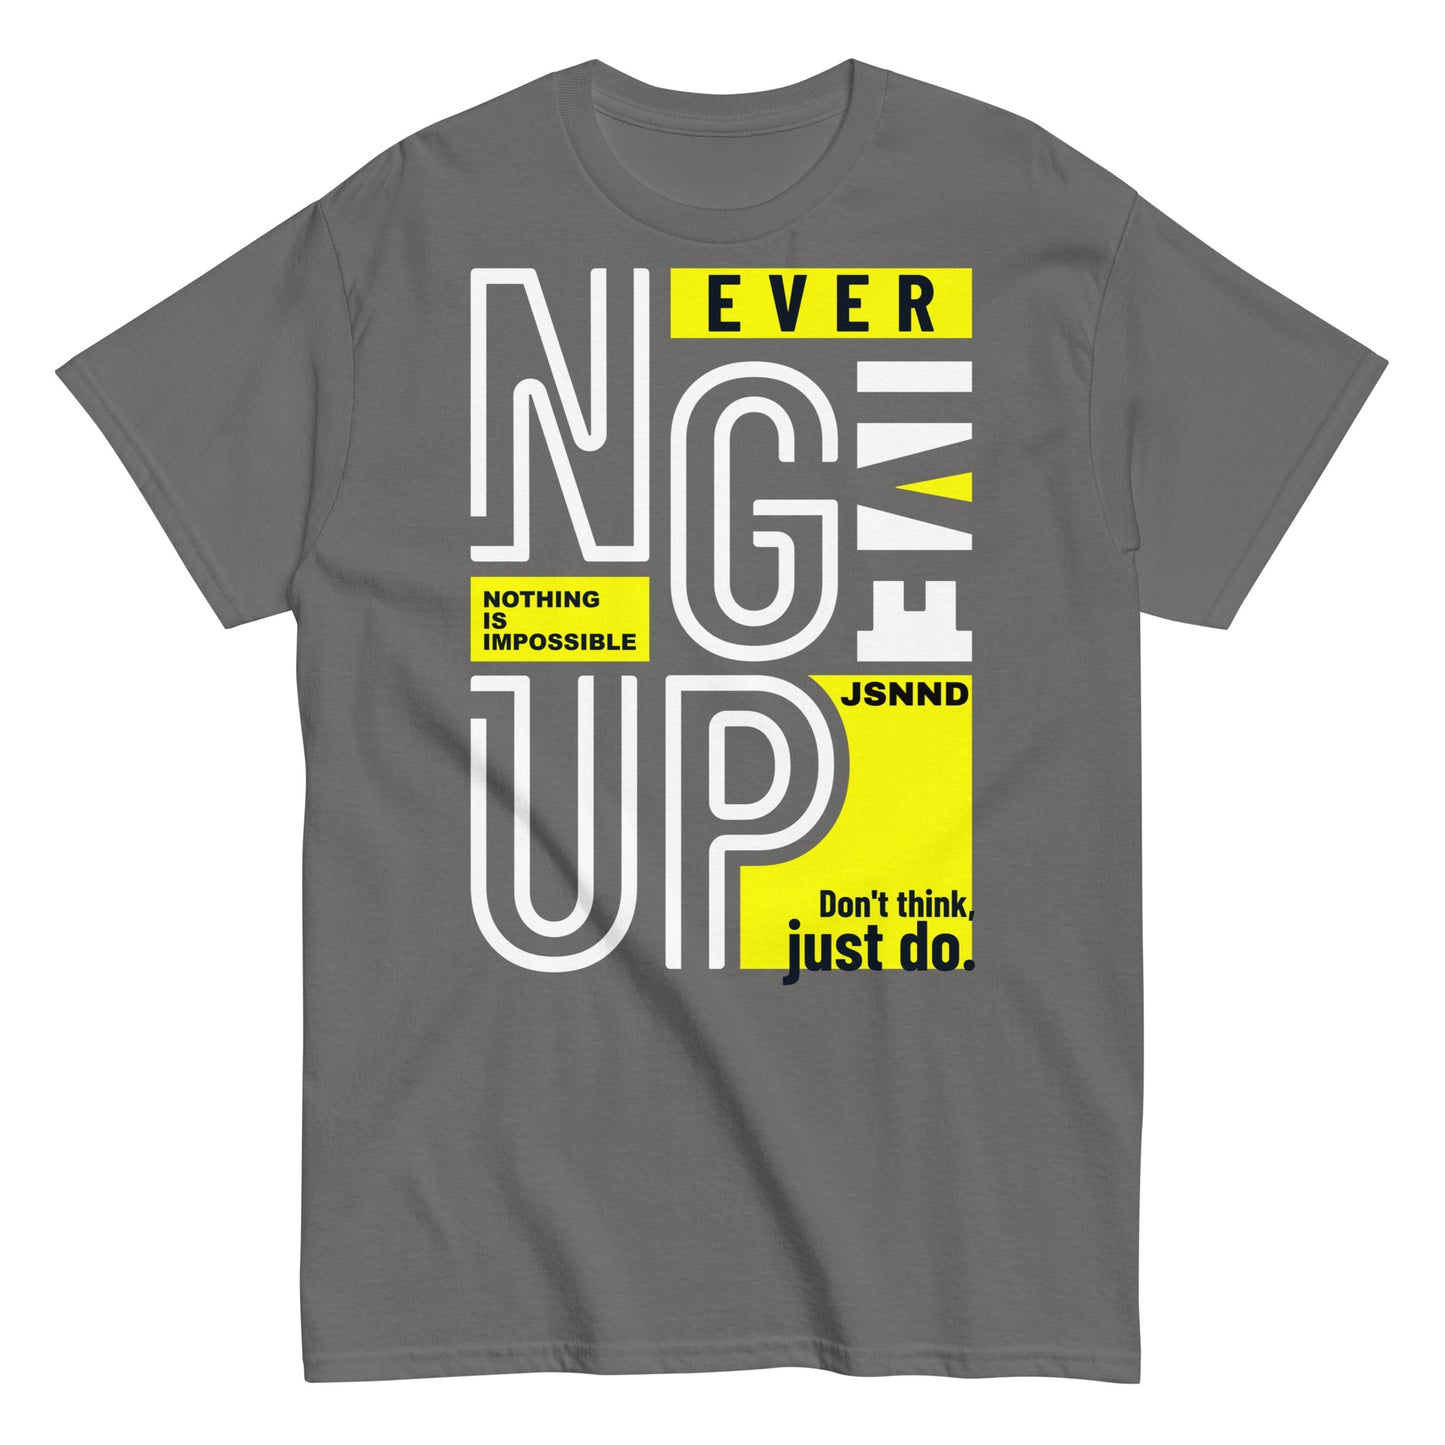 Never-give-up T-shirt